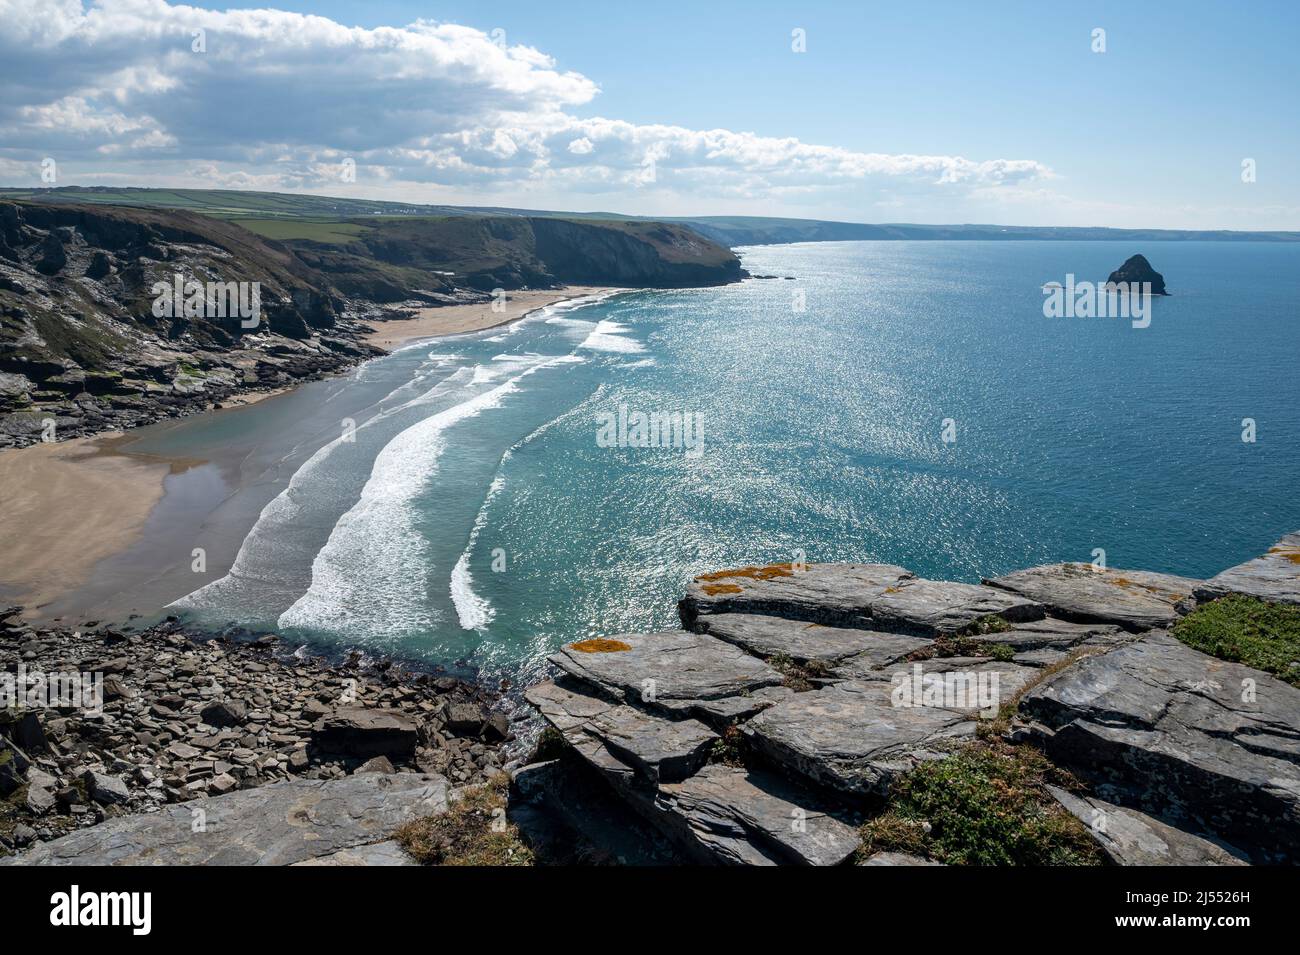 The golden sands of Trebarwith Strand beach, North Cornwall, UK with Gull Rock island, cliffs and turquoise sea. Stock Photo